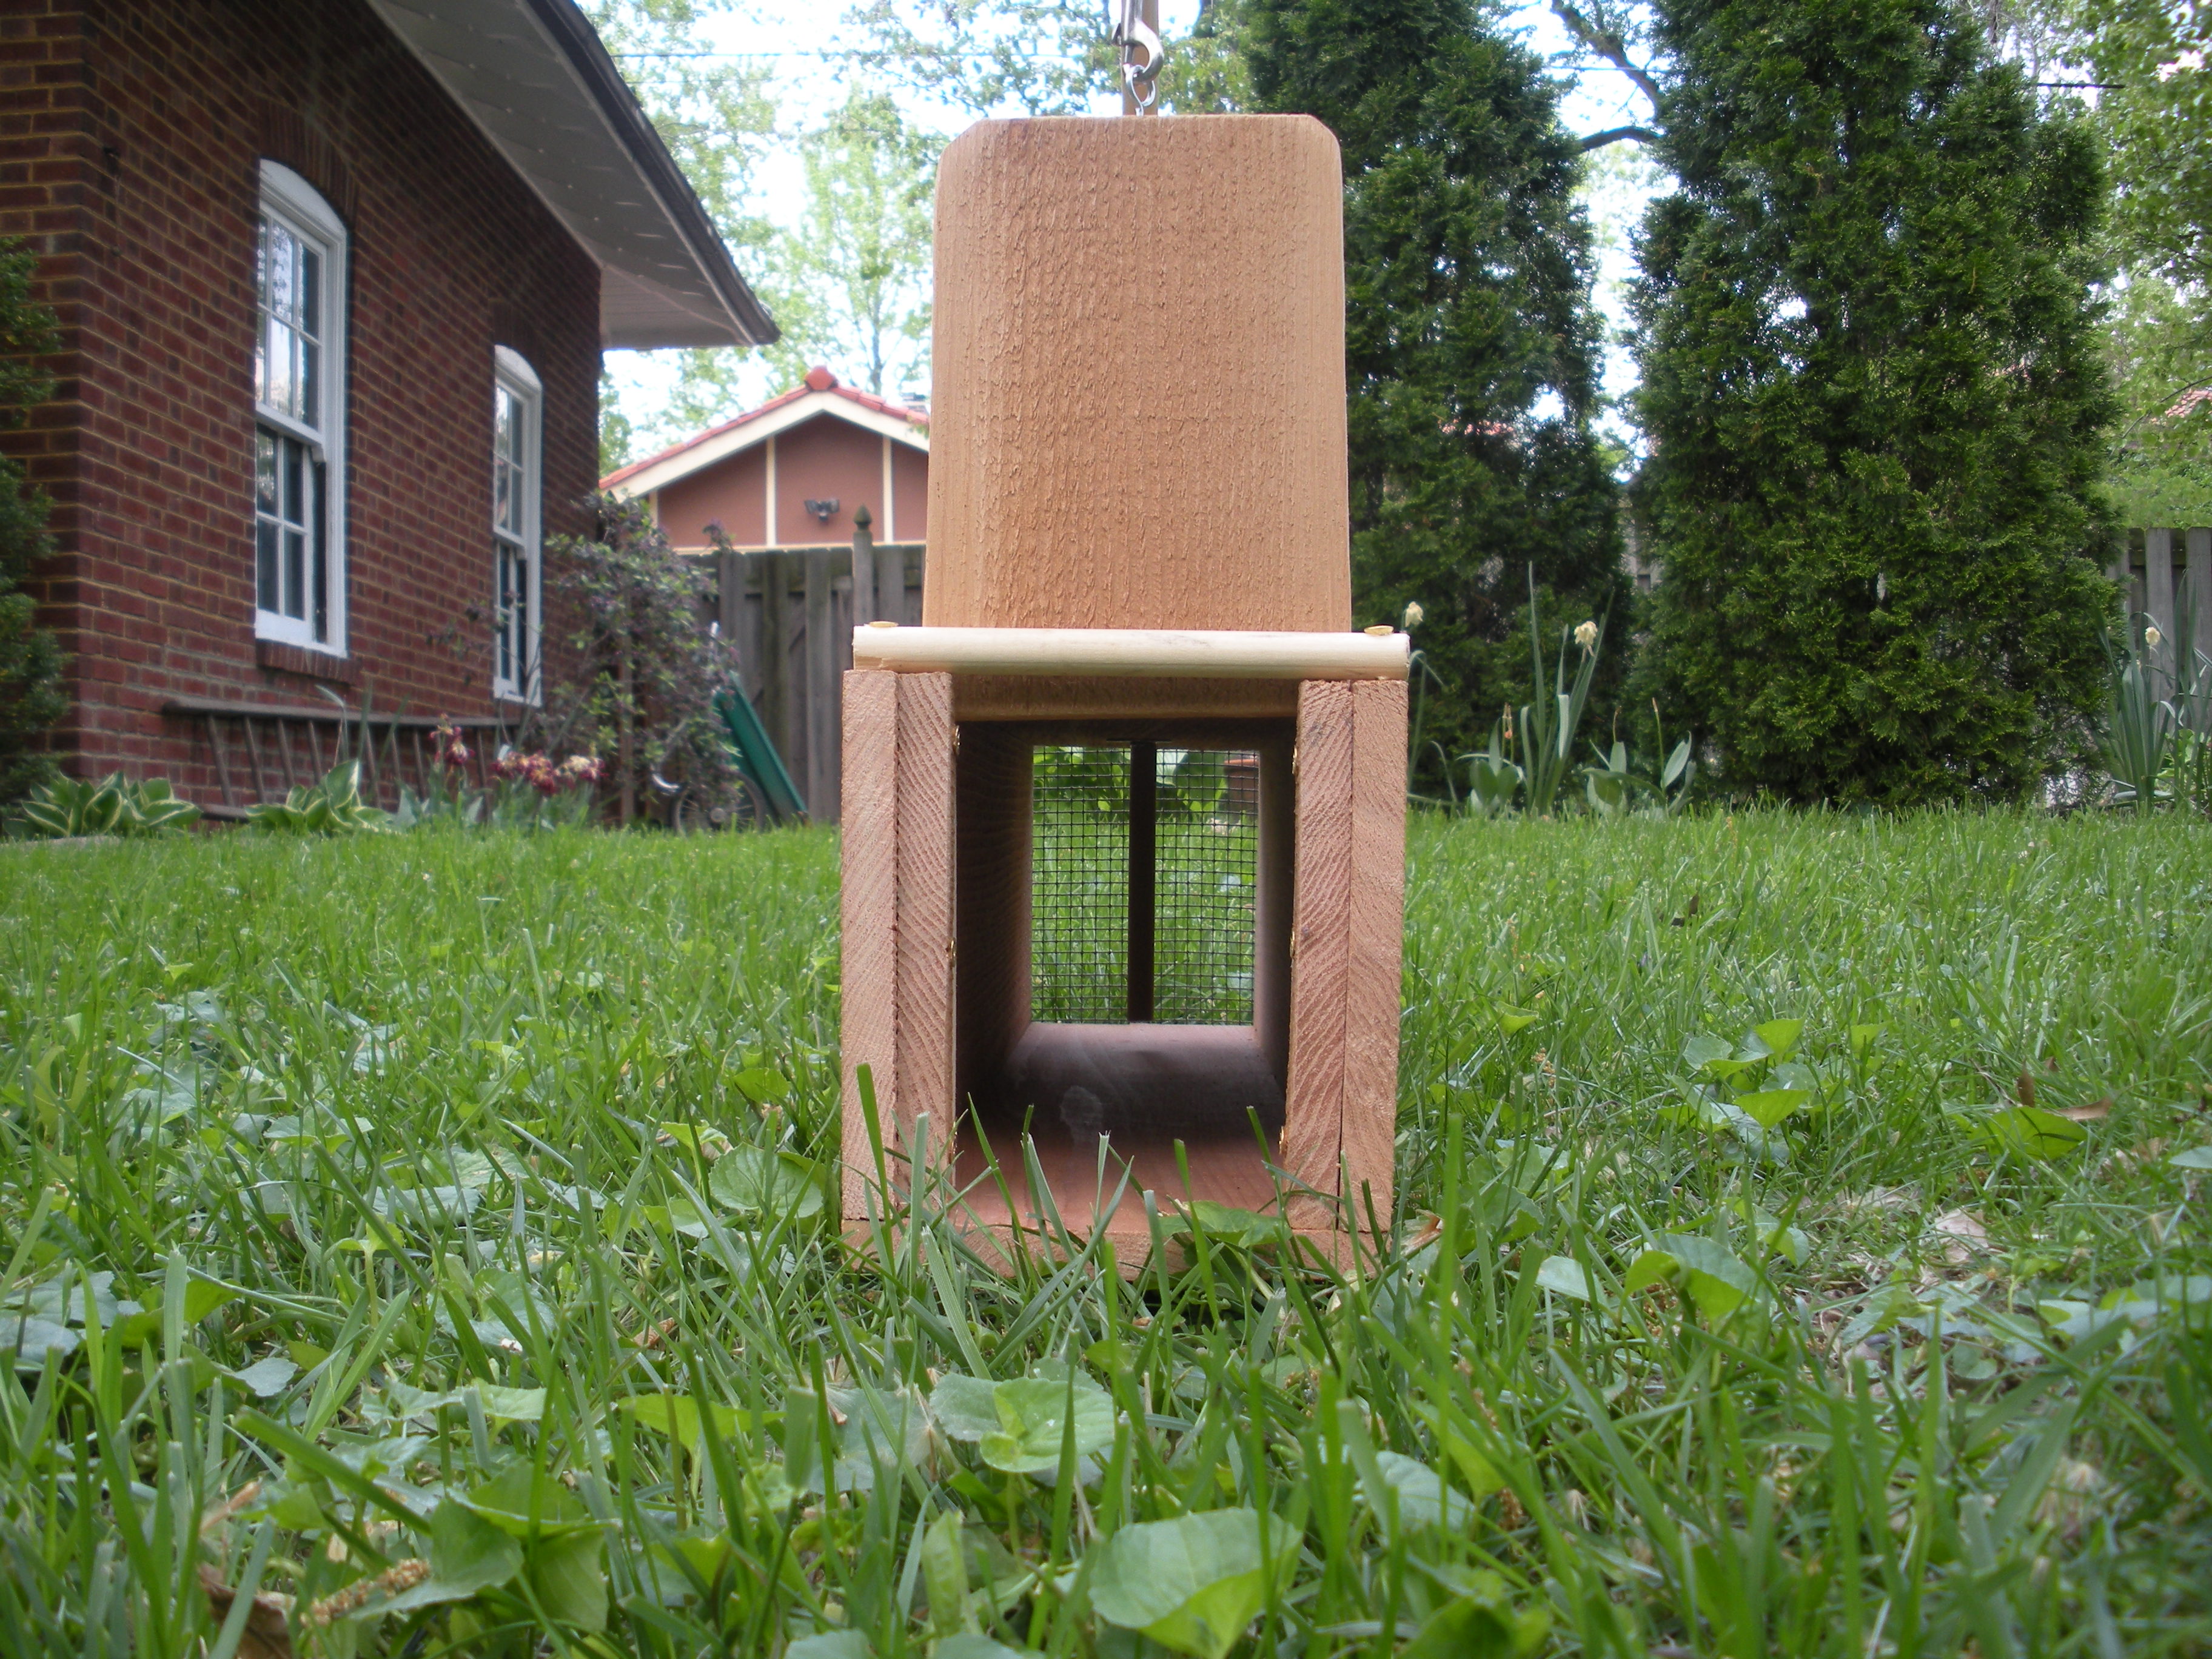 How to Build a Live Rabbit Box Trap